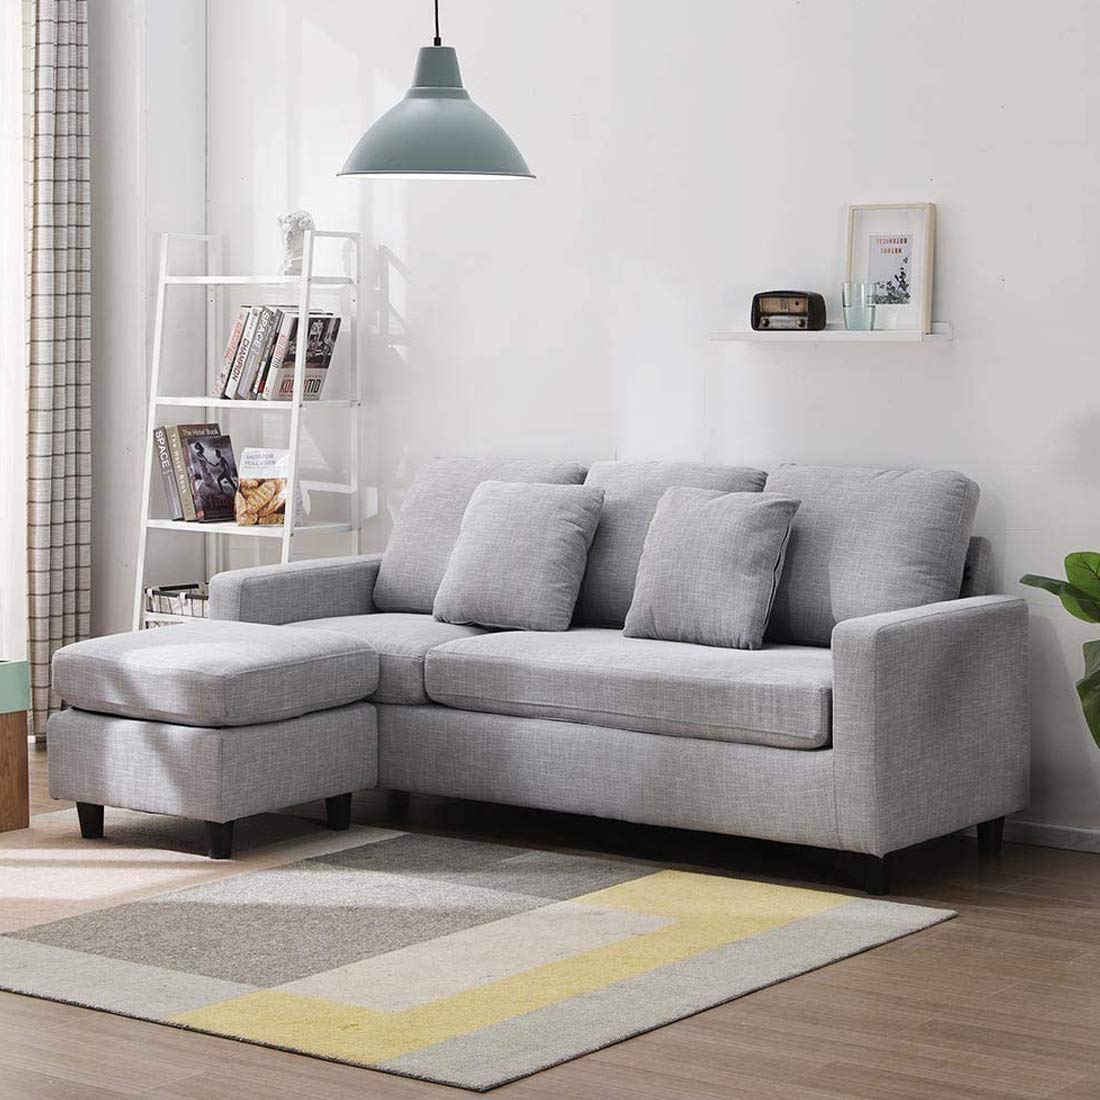 Get the Best Prices on L Shape Sofa Online in India! - GKW Retail